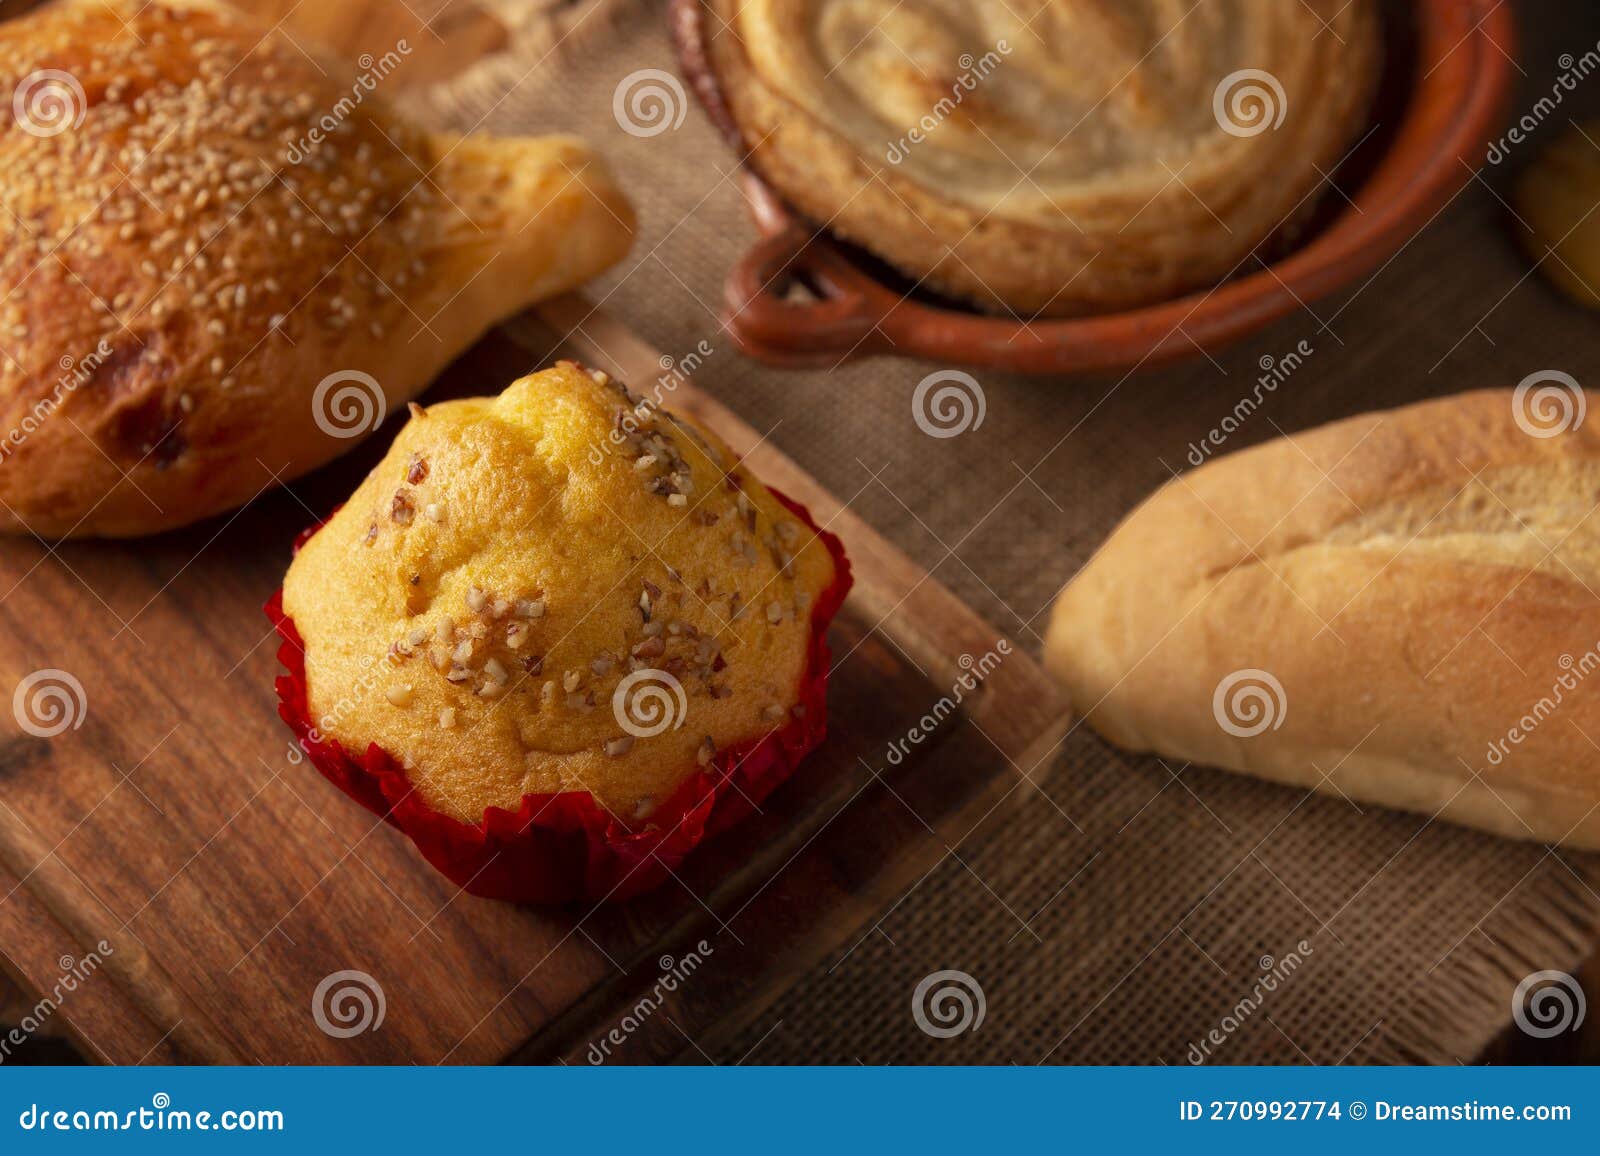 muffin sweet bread mexico